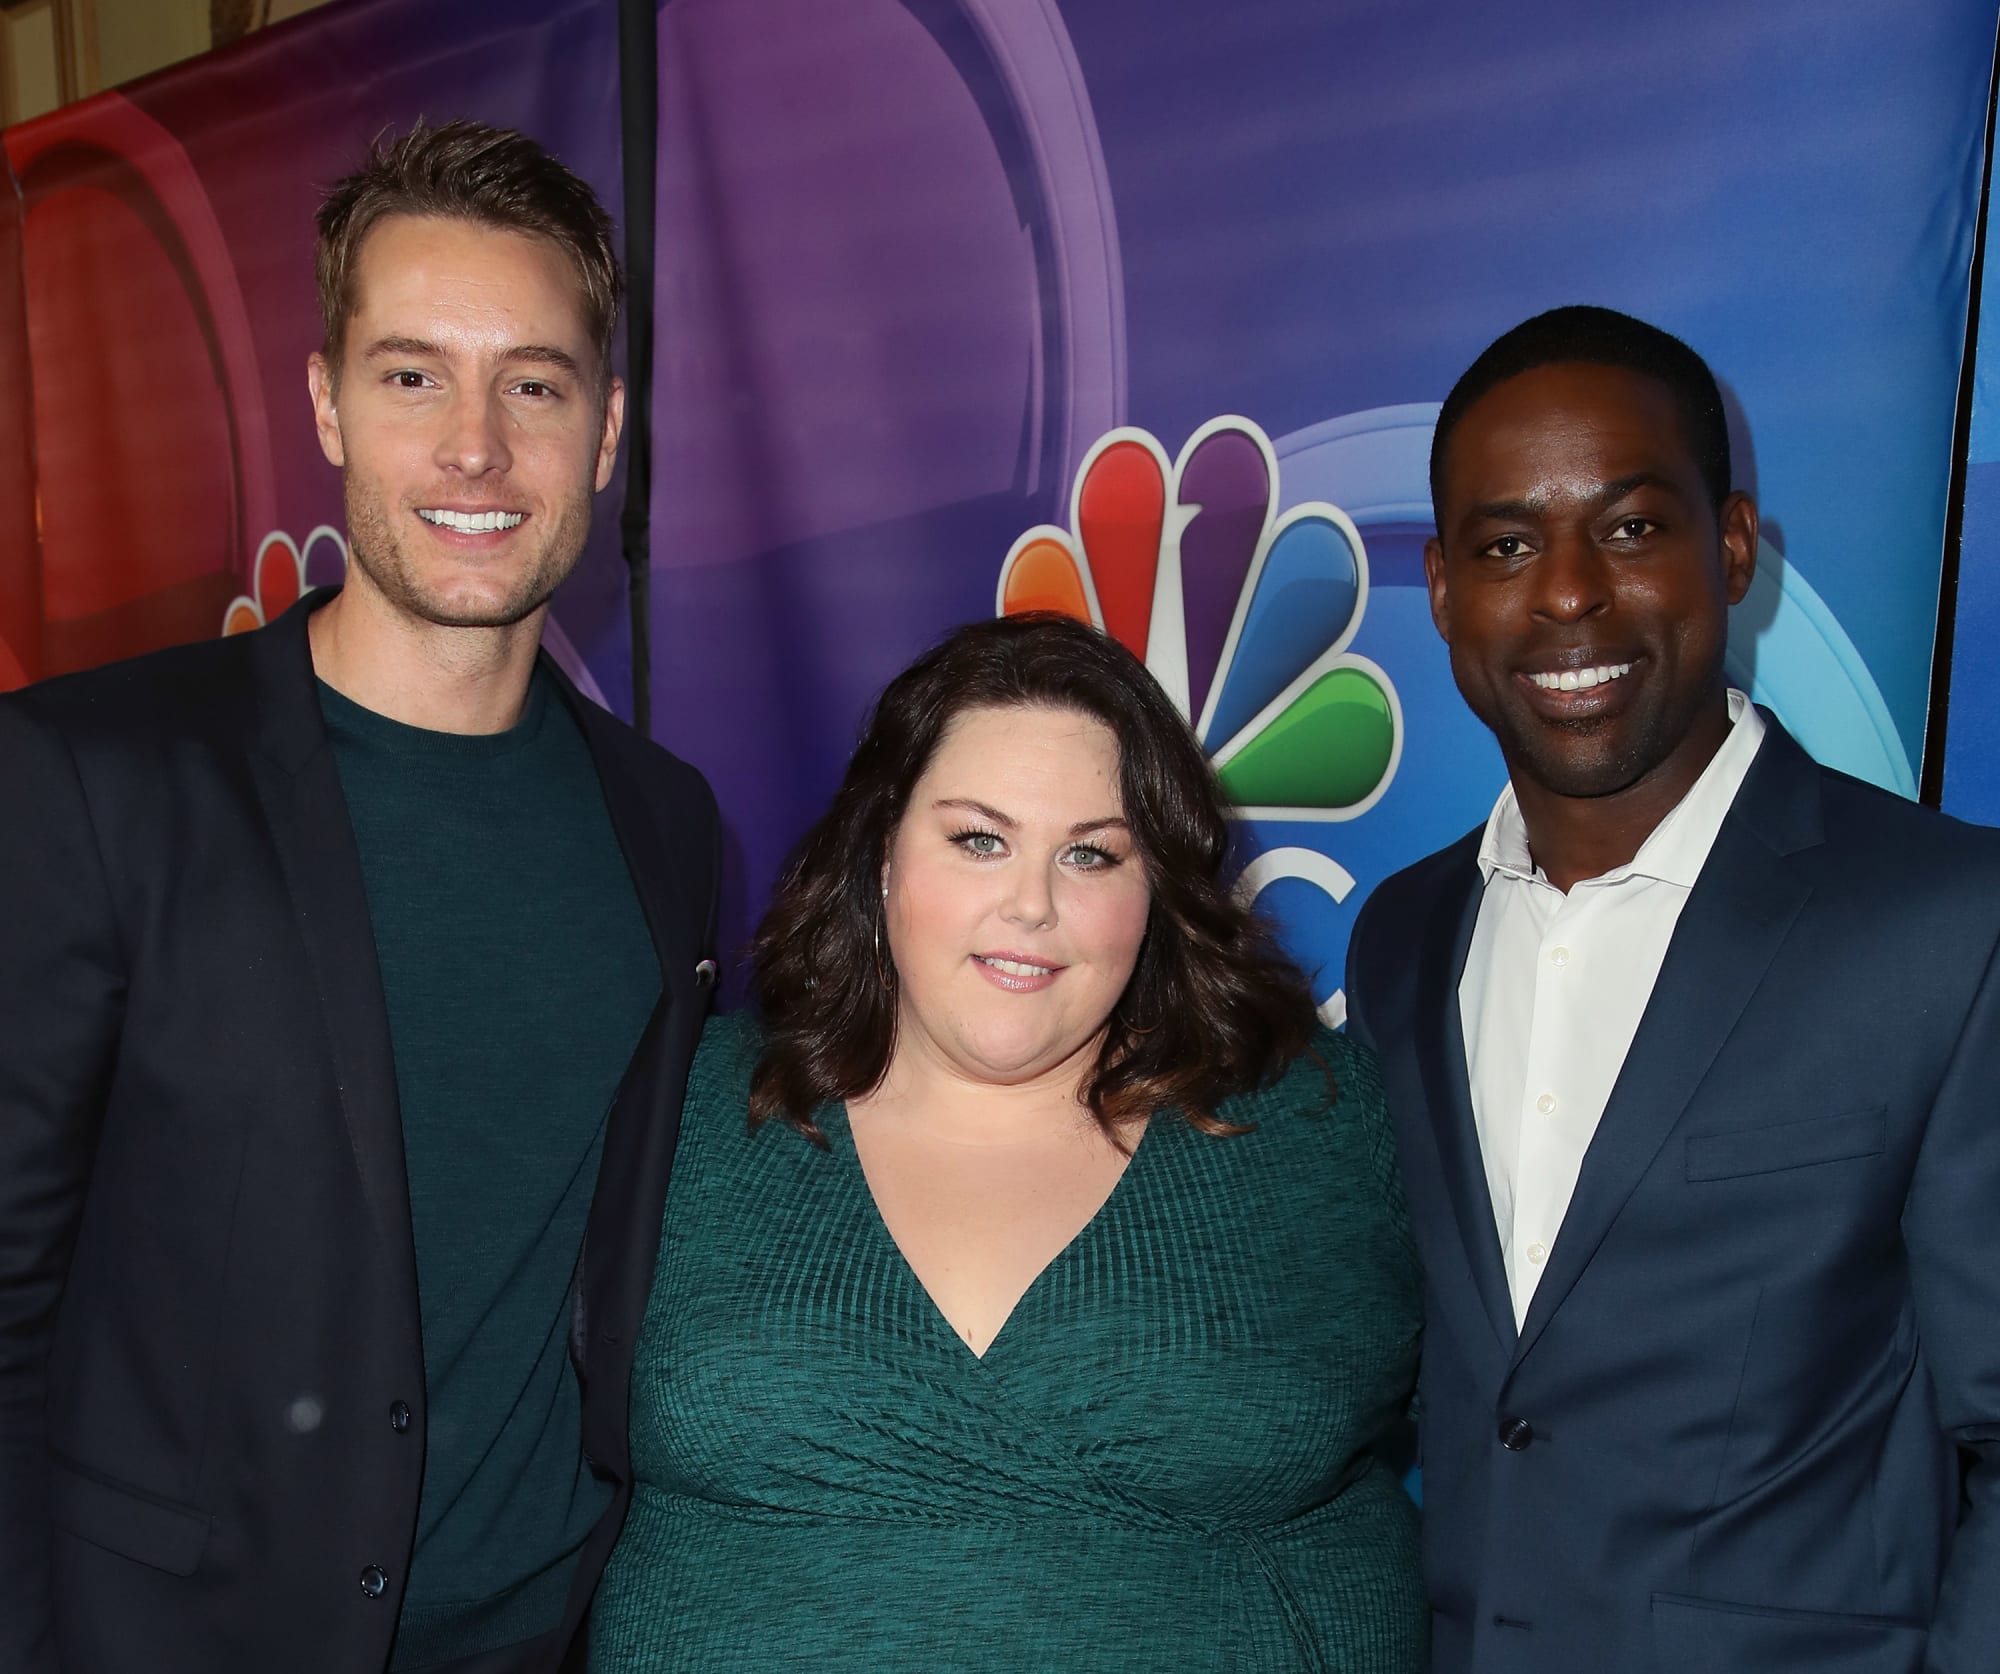 Is This Is Us on NBC tonight, Feb. 28?